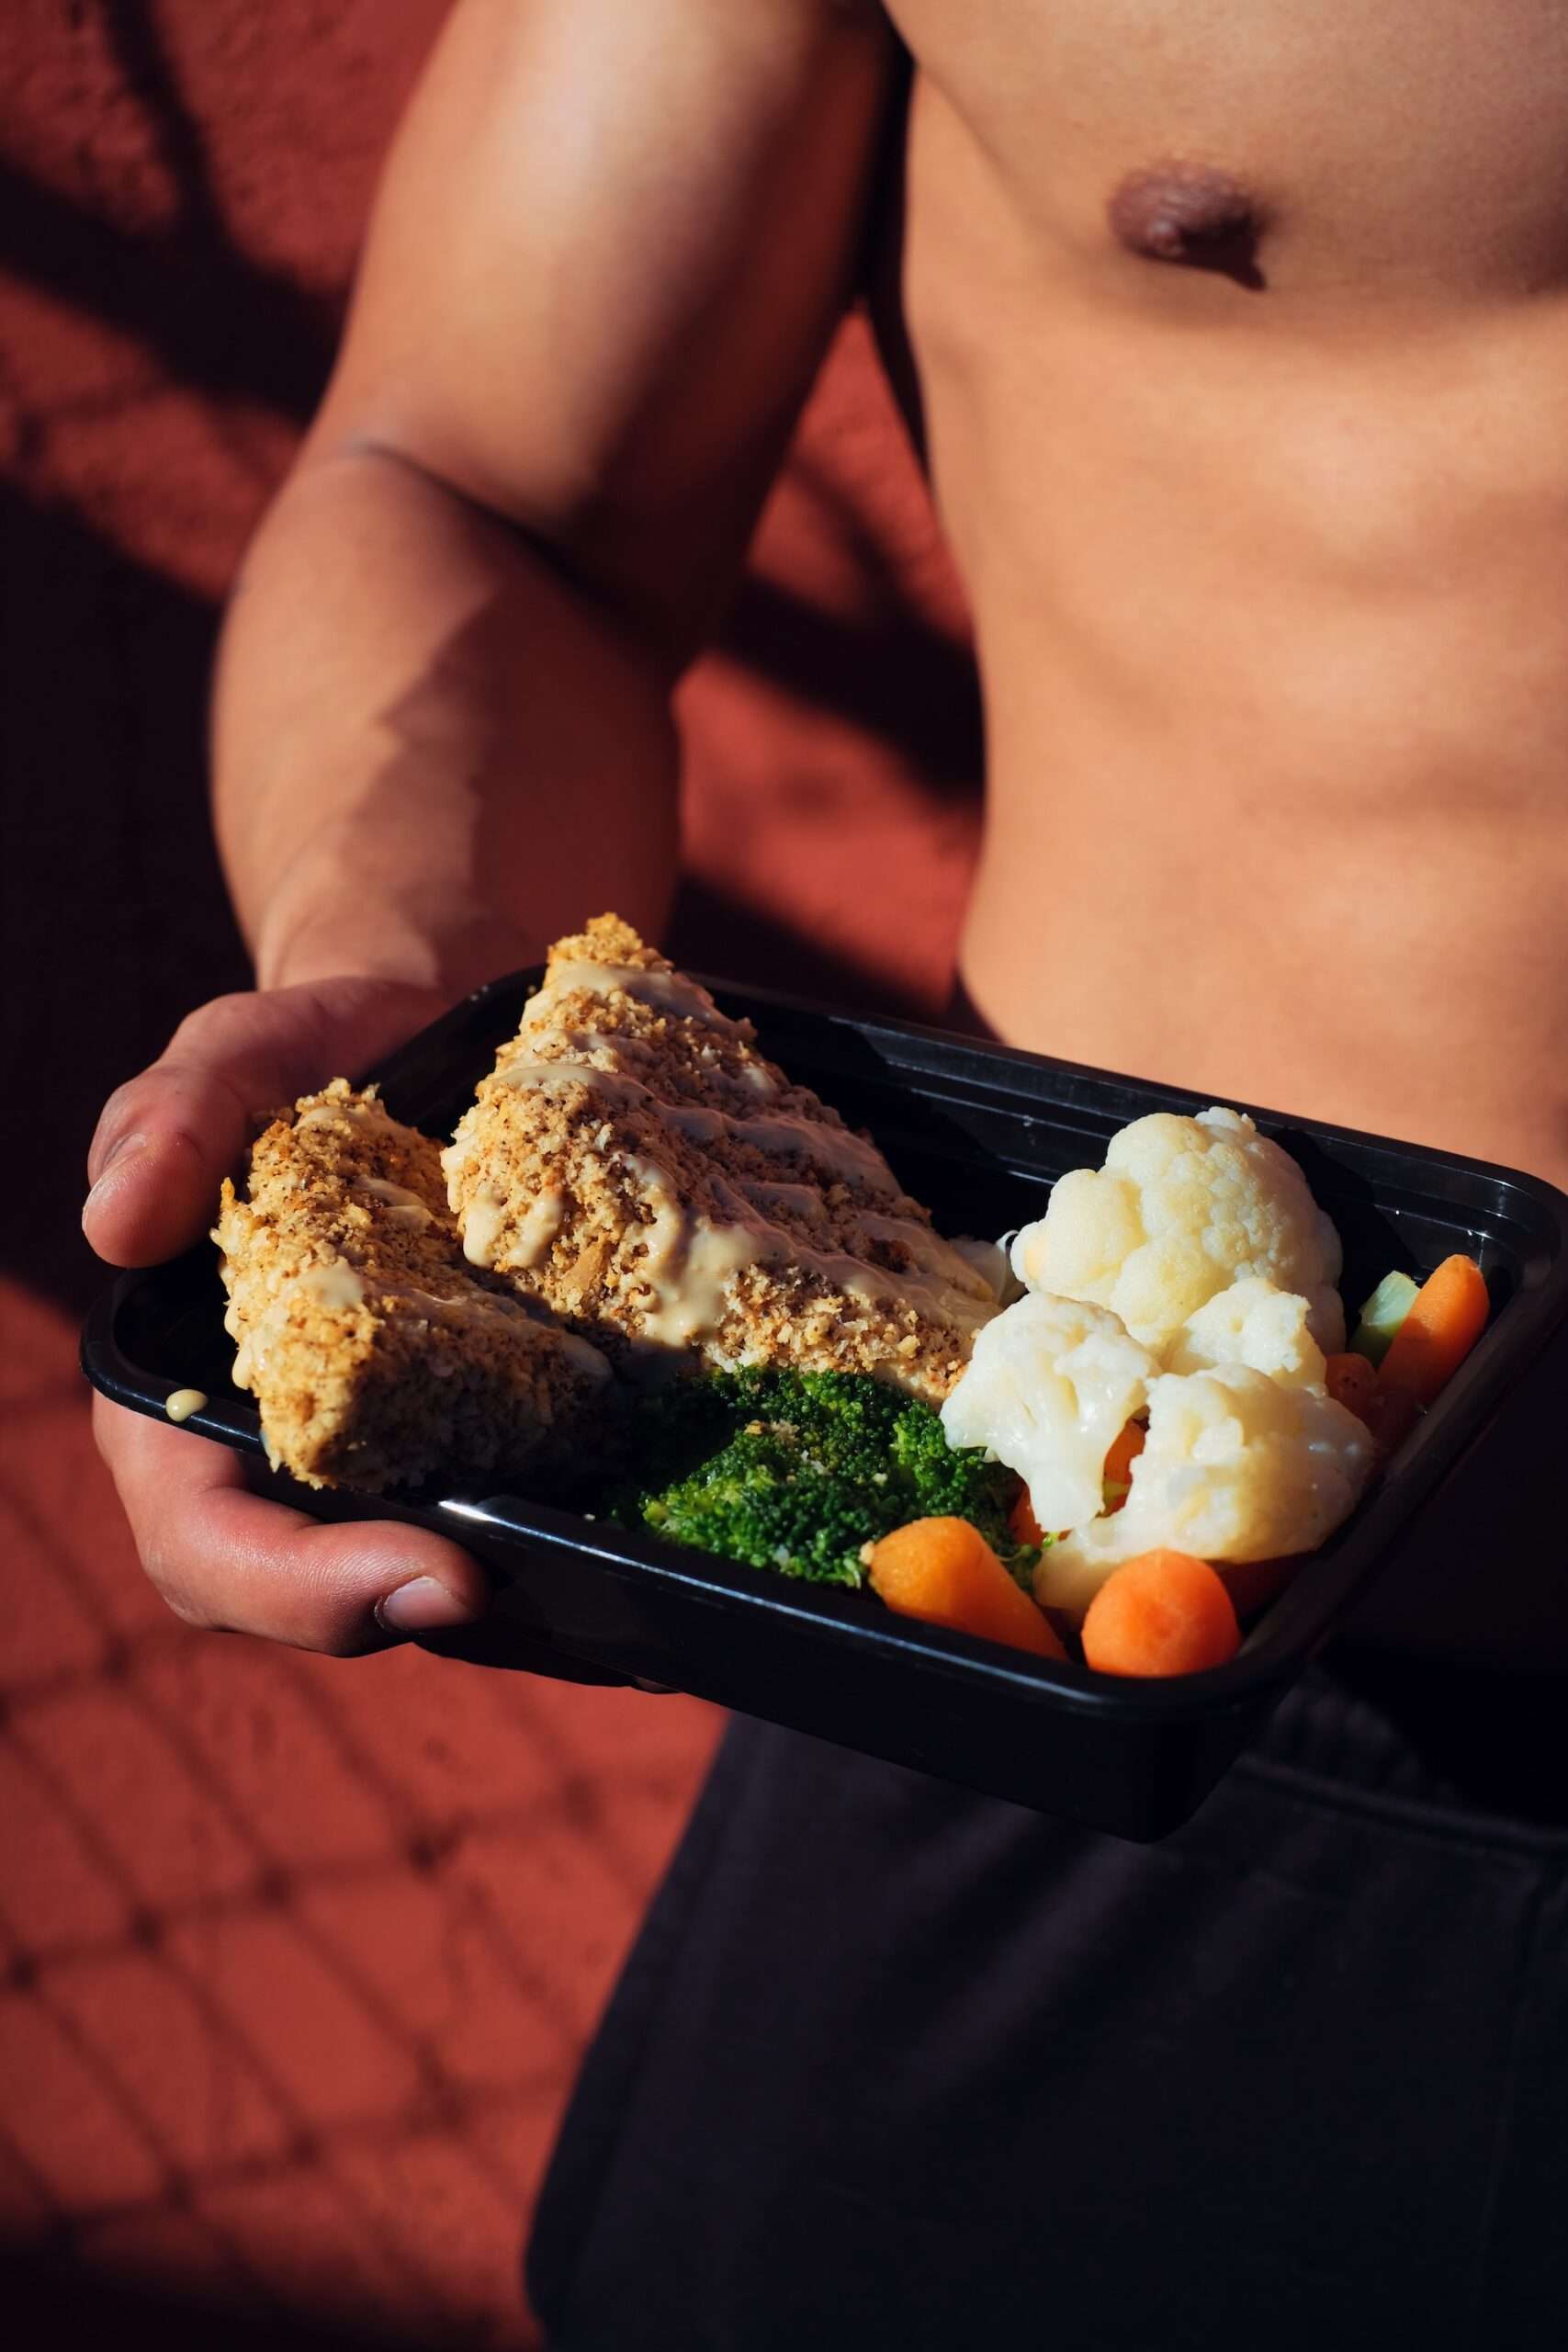 a person holding a healthy meal for his diet